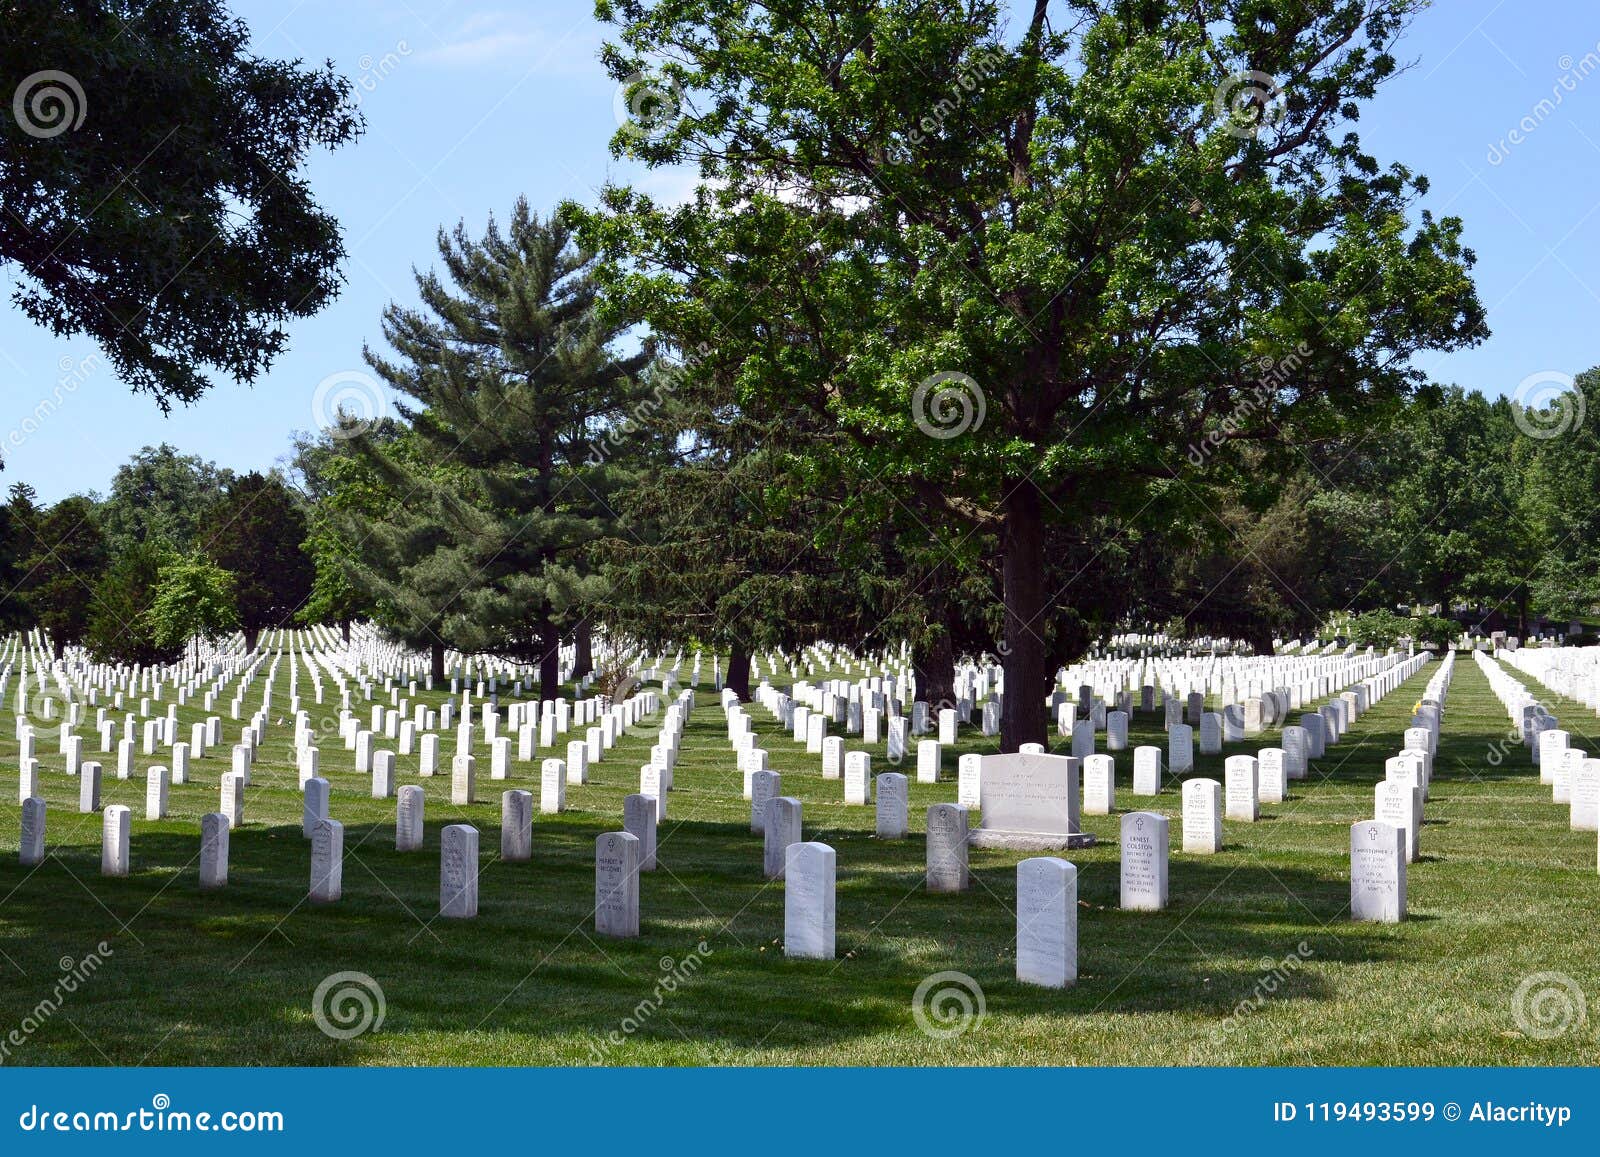 rows of graves at arlington national cemetery